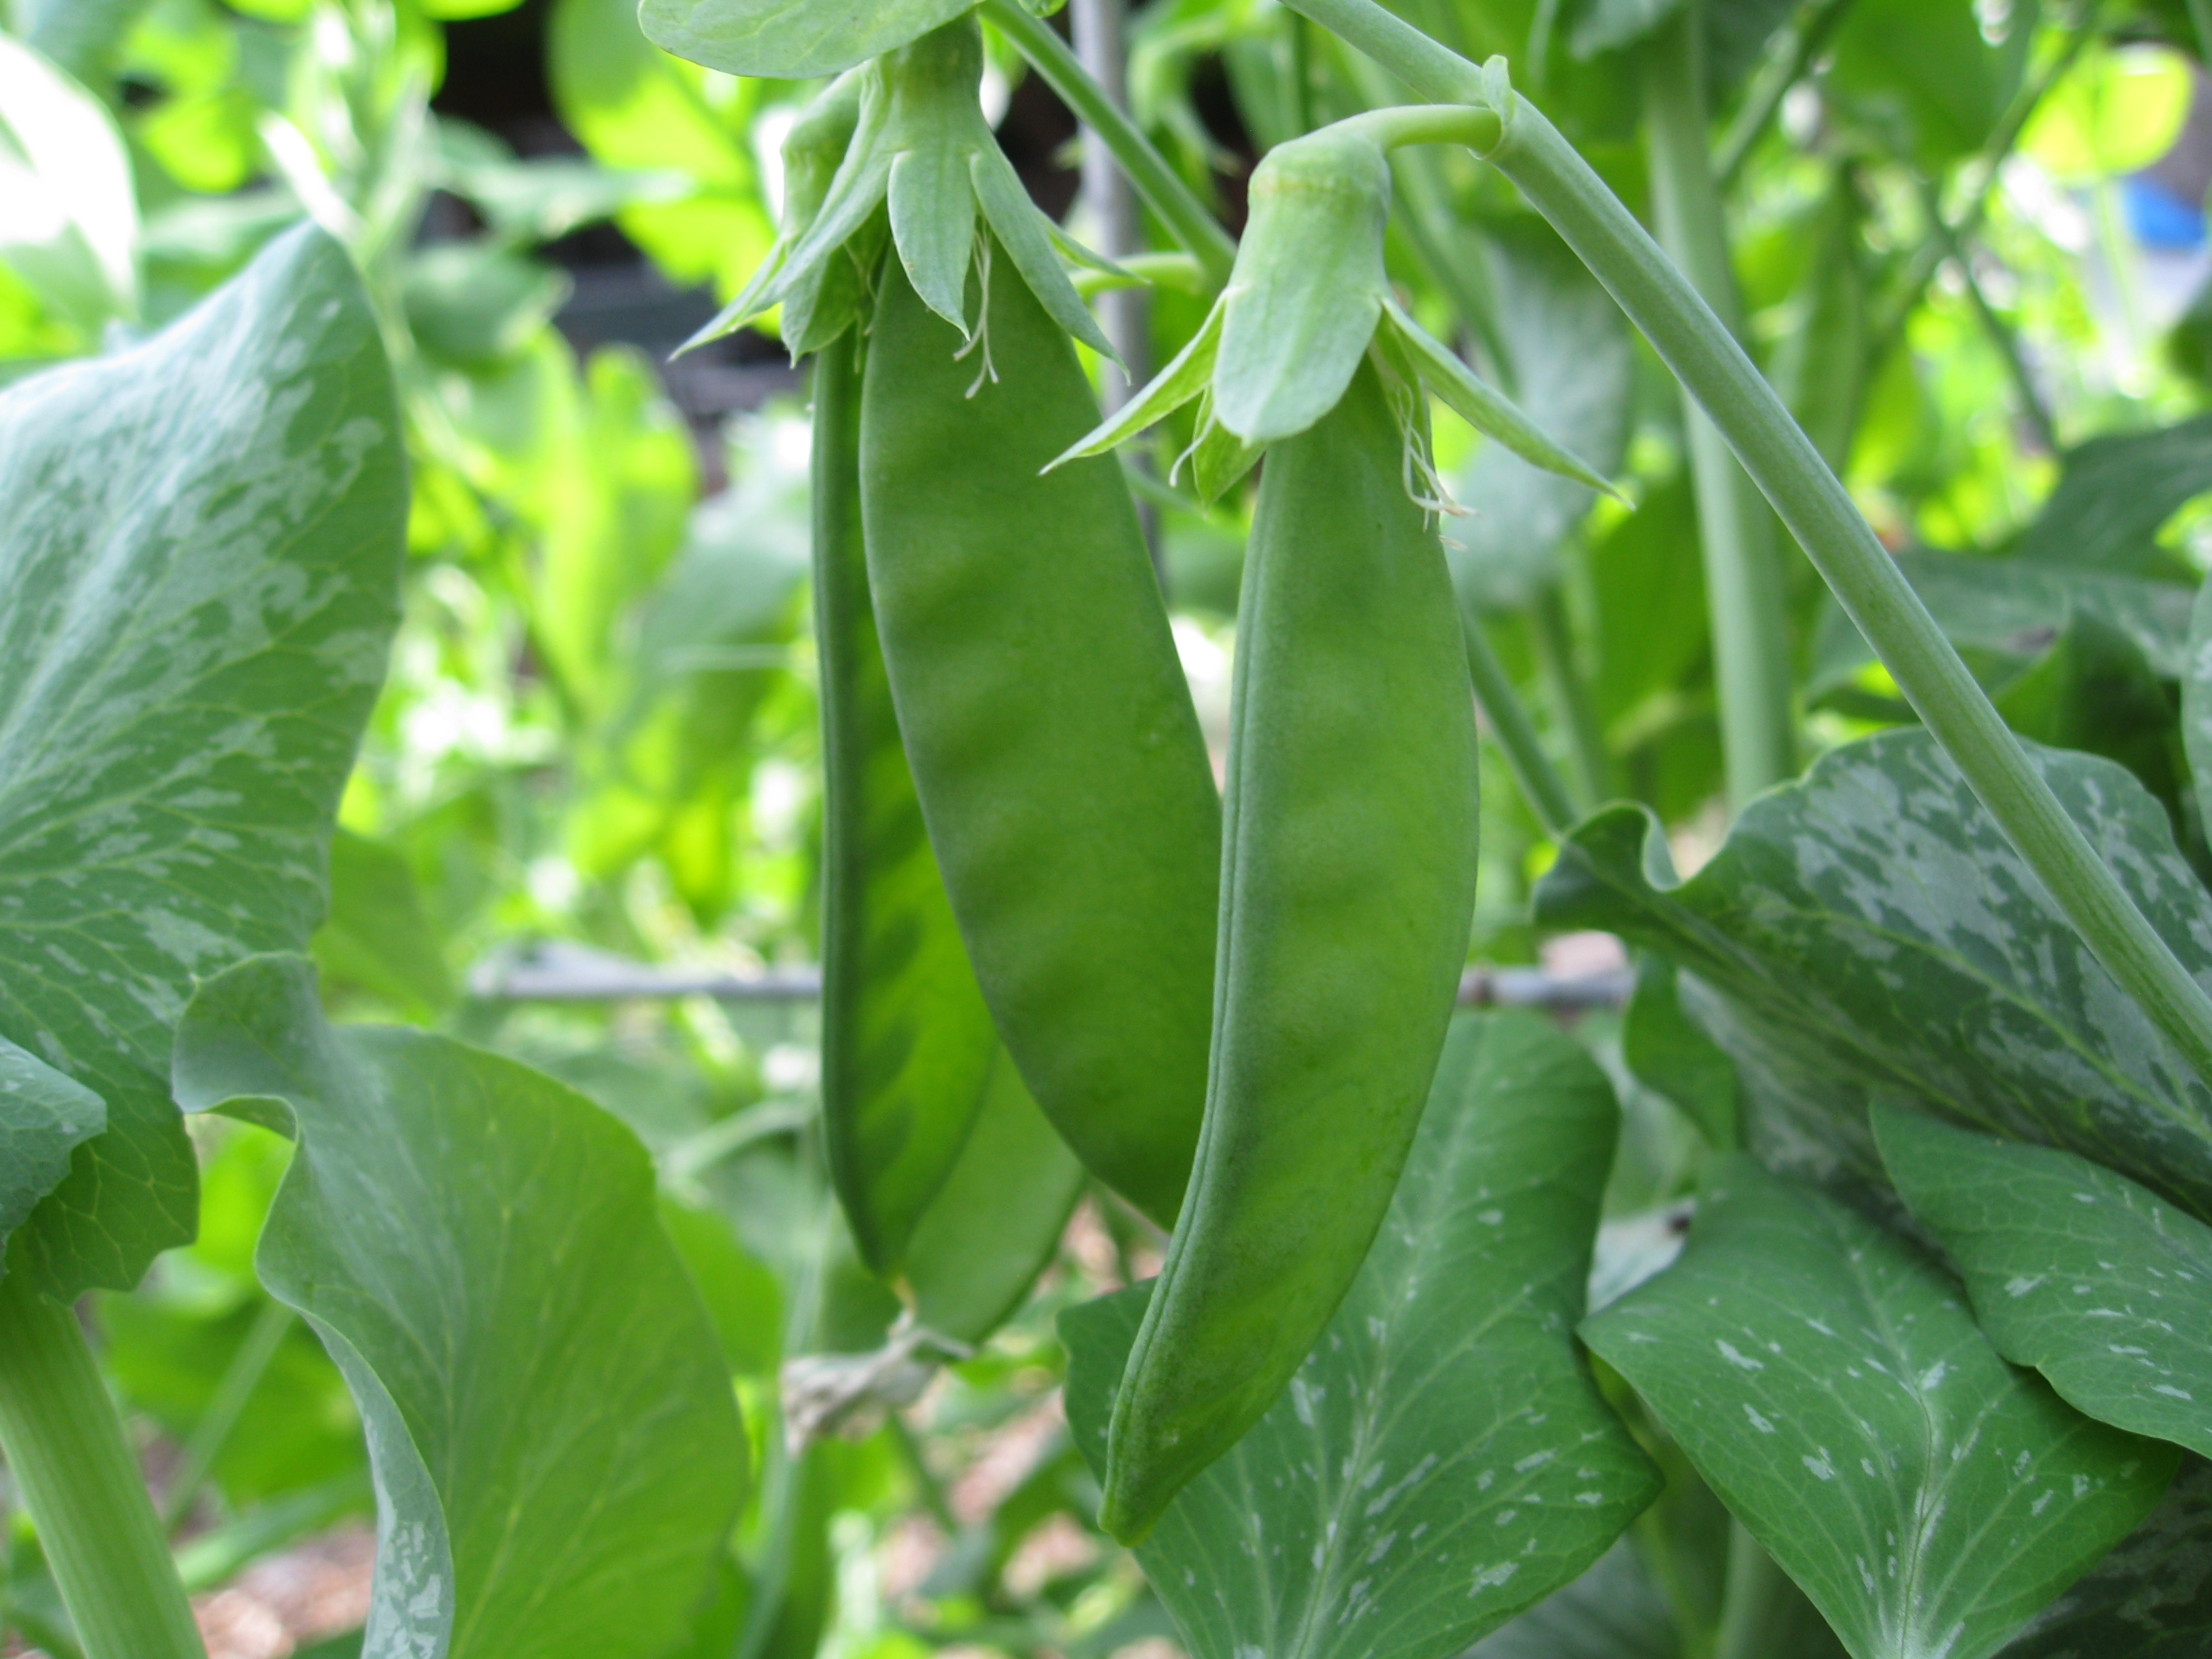 Snow peas fruit first, ahead of sugar snaps in the winter garden.